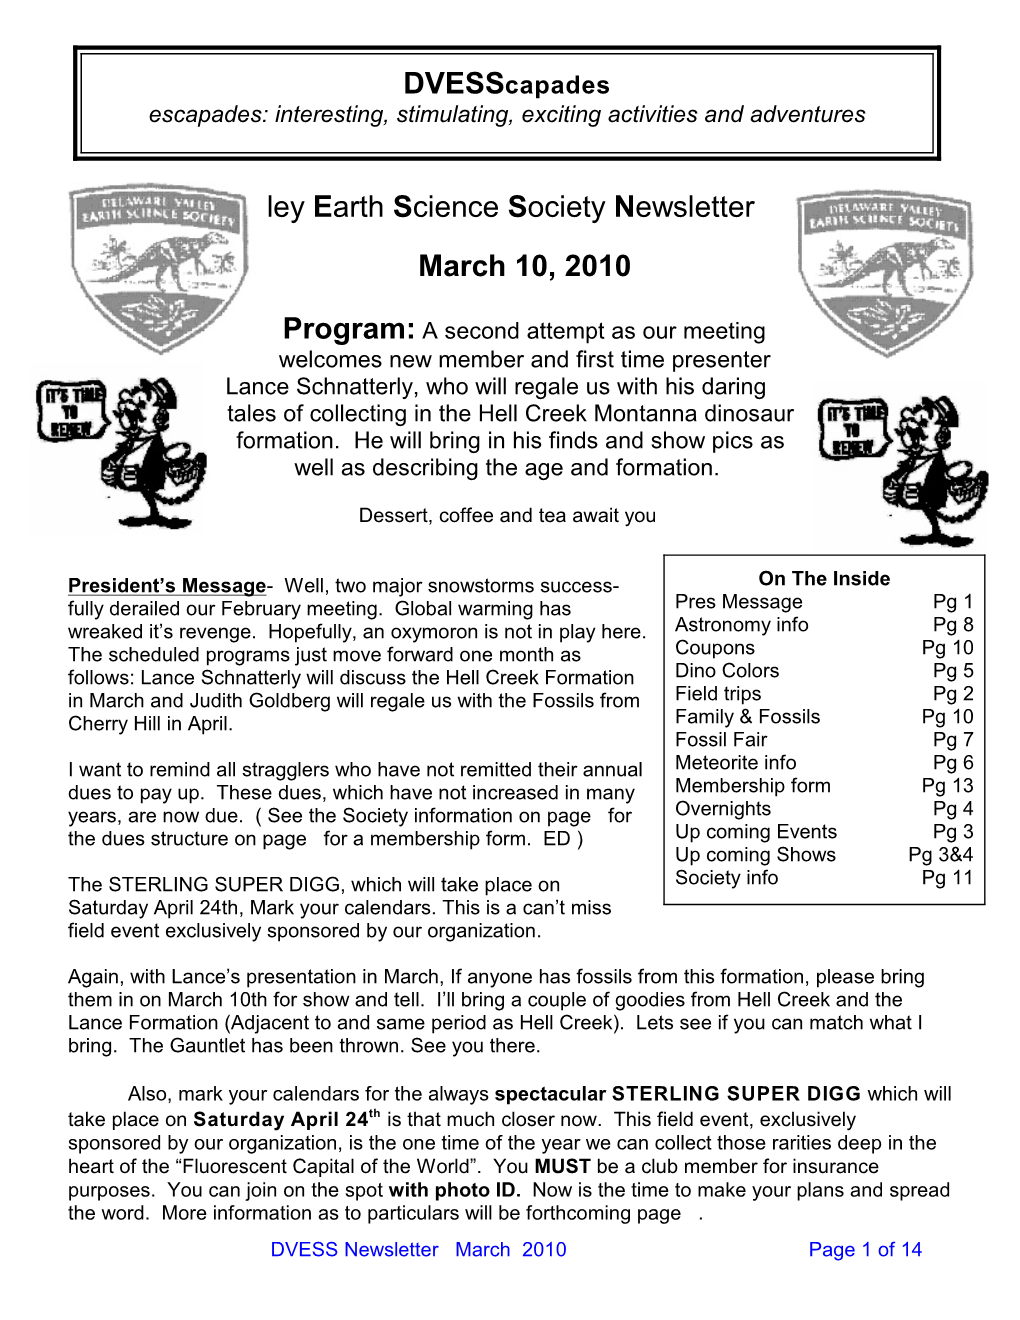 Delaware Valley Earth Science Society Newsletter March 10, 2010